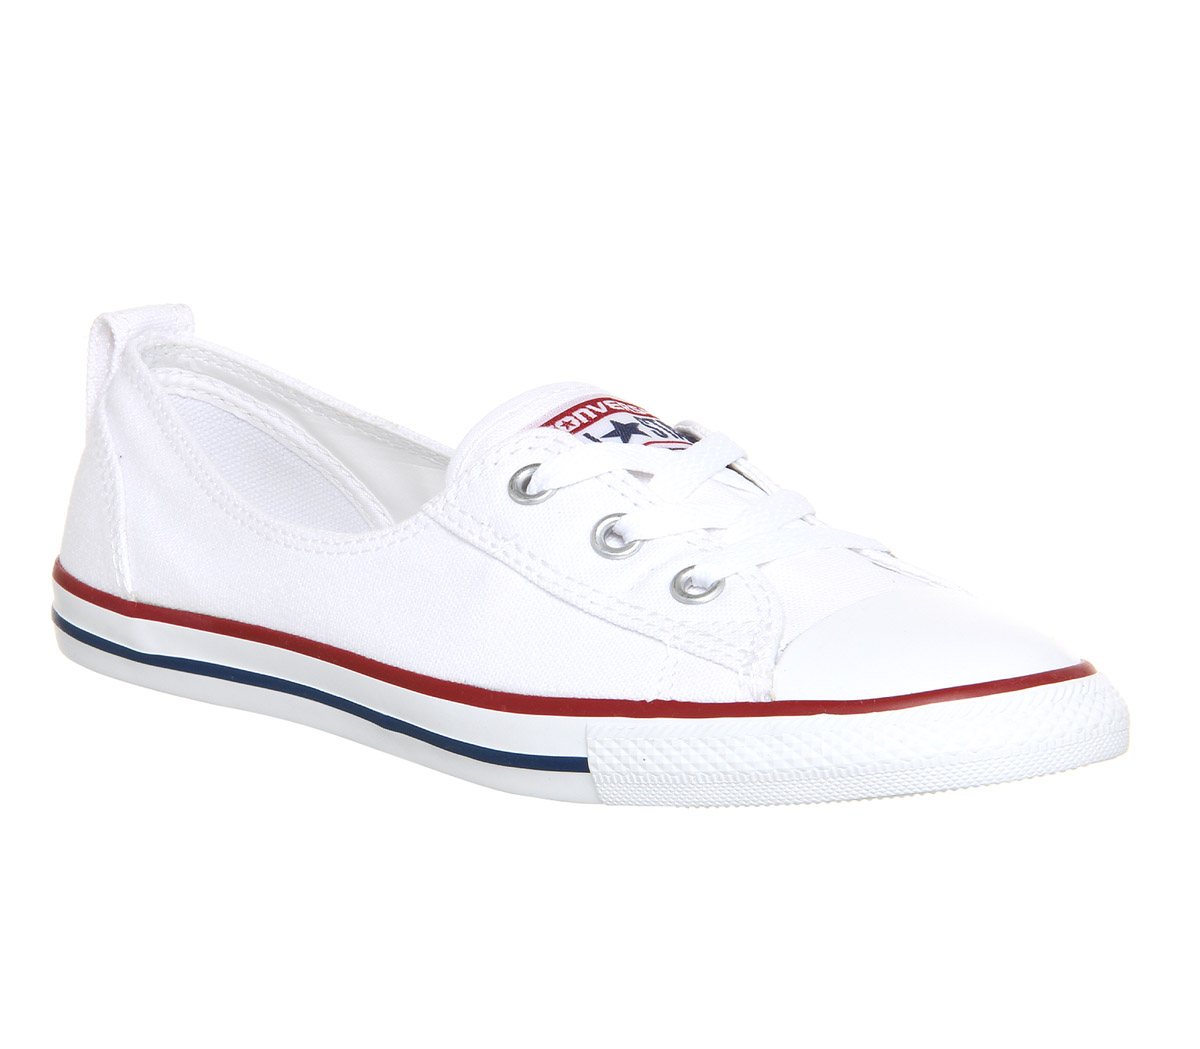 Converse Ctas Ballet Lace Optical White - Hers Exclusives